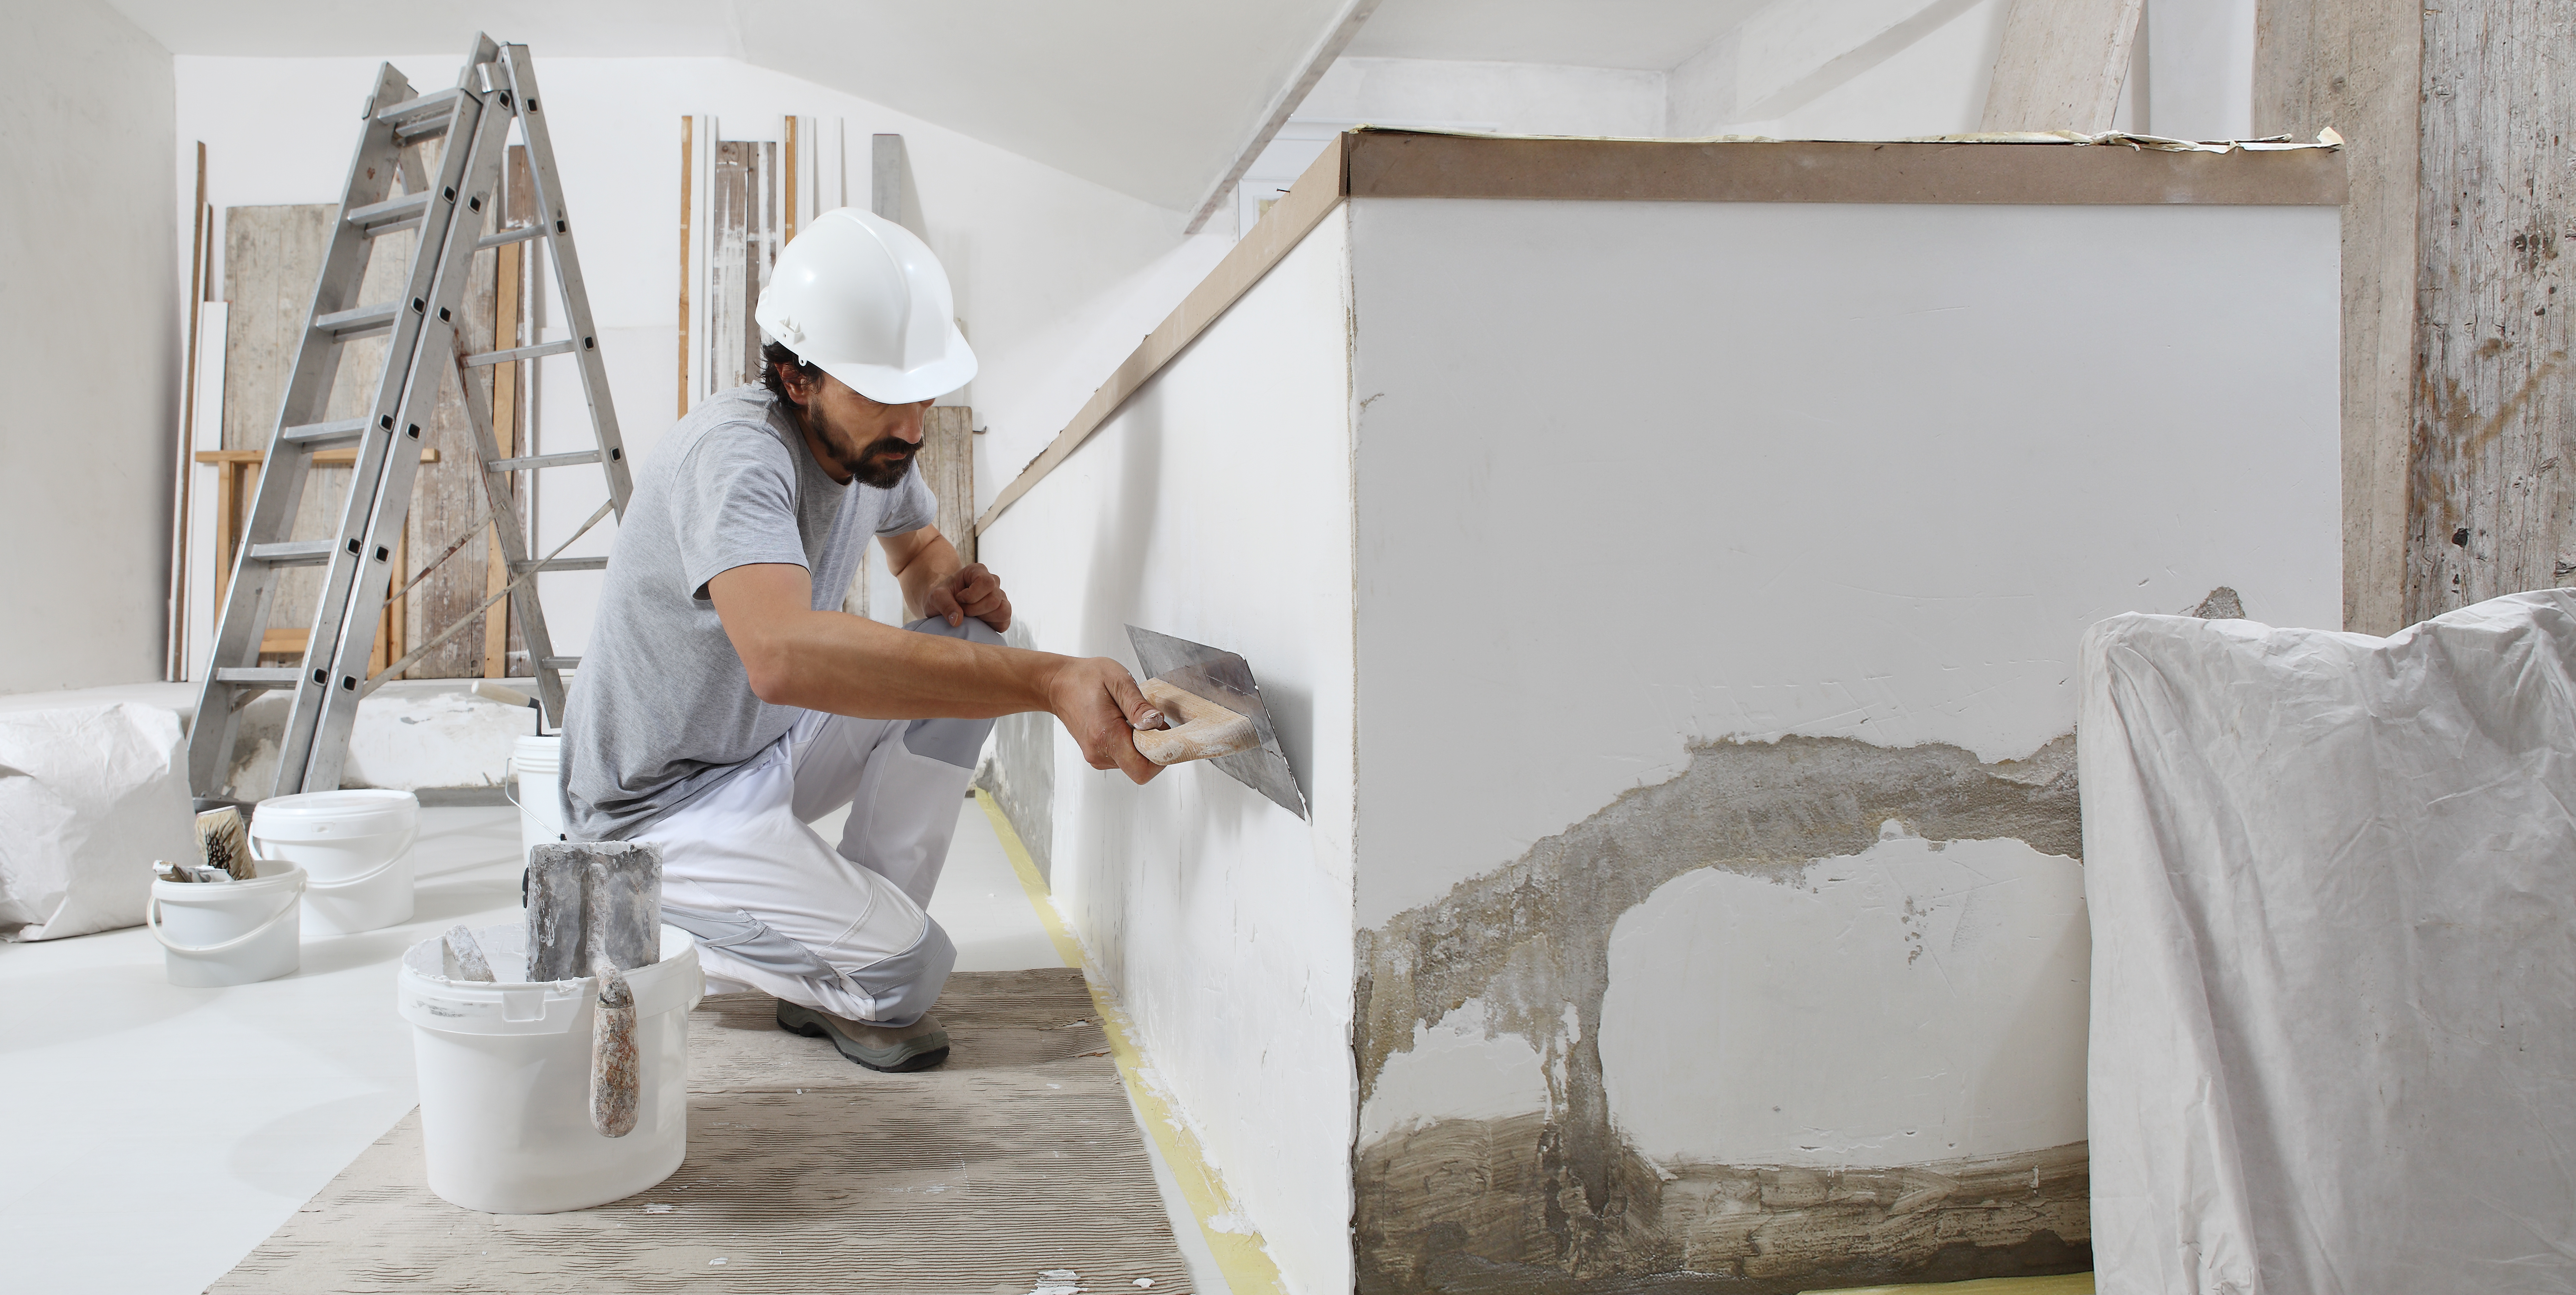 Very Profitable Painting Contractor Company For Sale